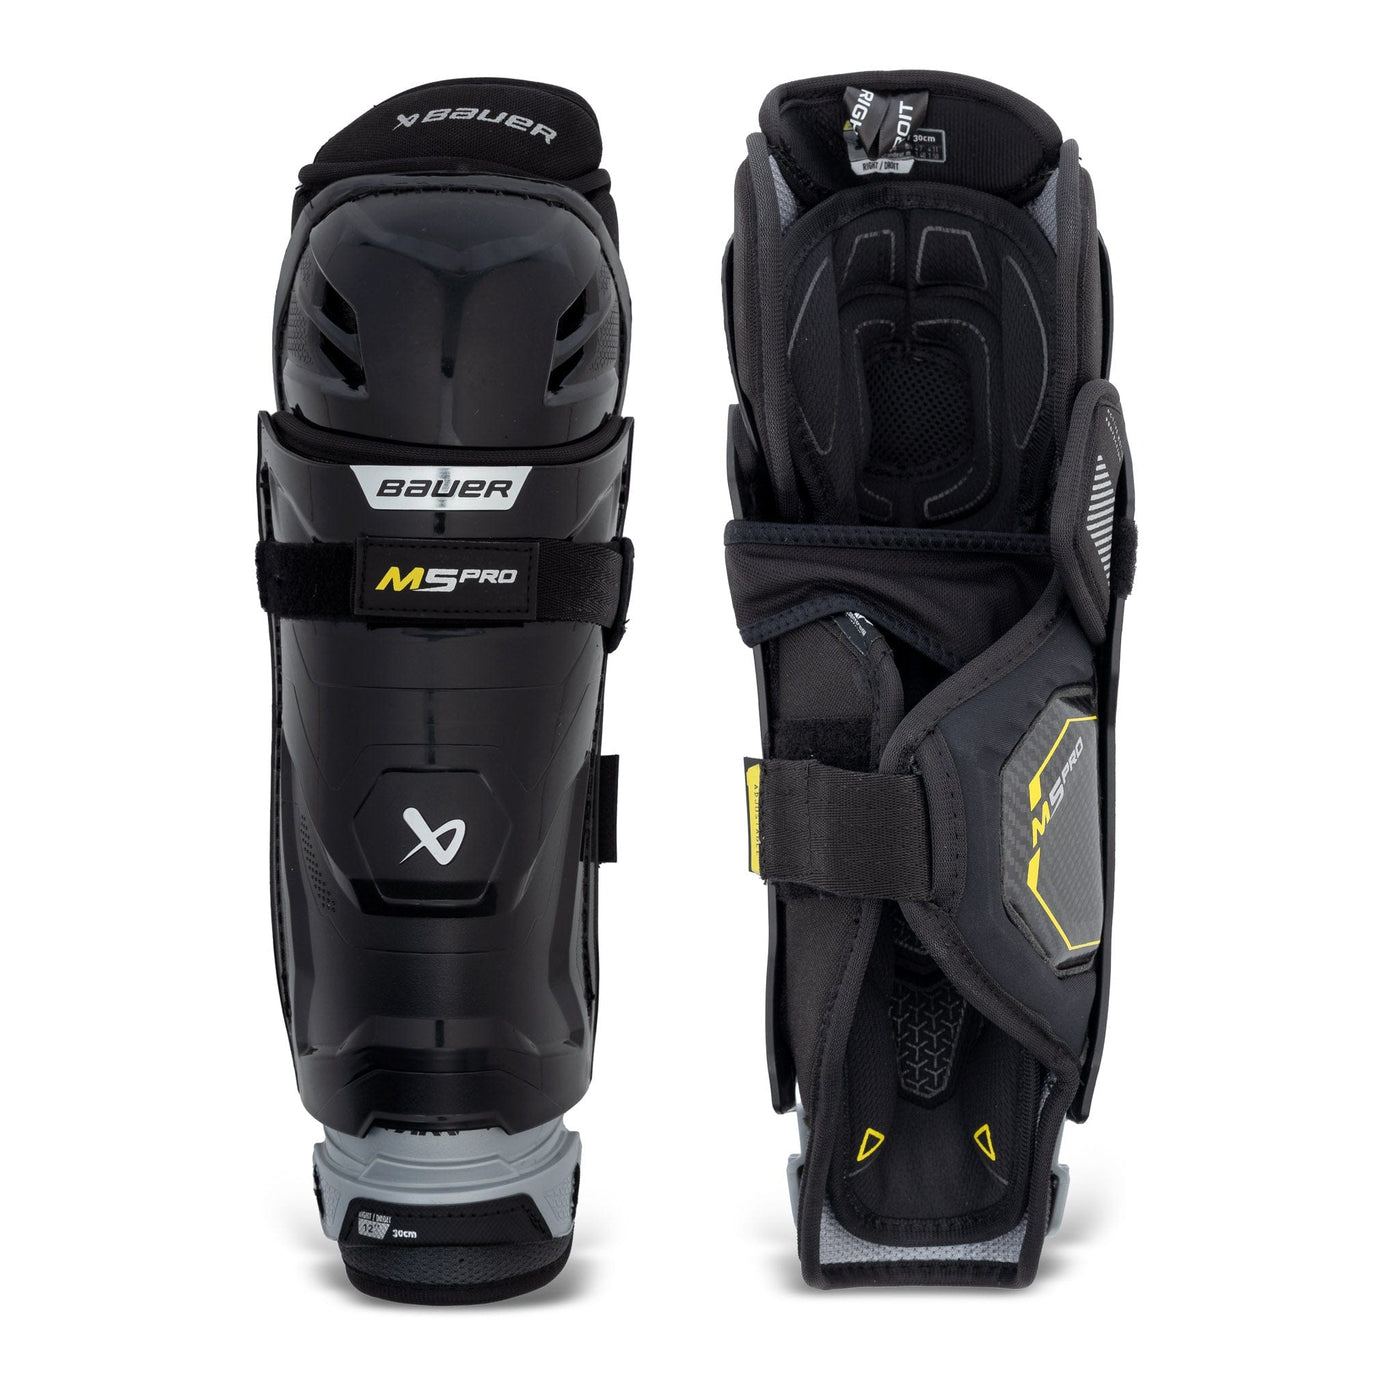 Bauer Supreme M5 Pro Junior Hockey Shin Guards - The Hockey Shop Source For Sports